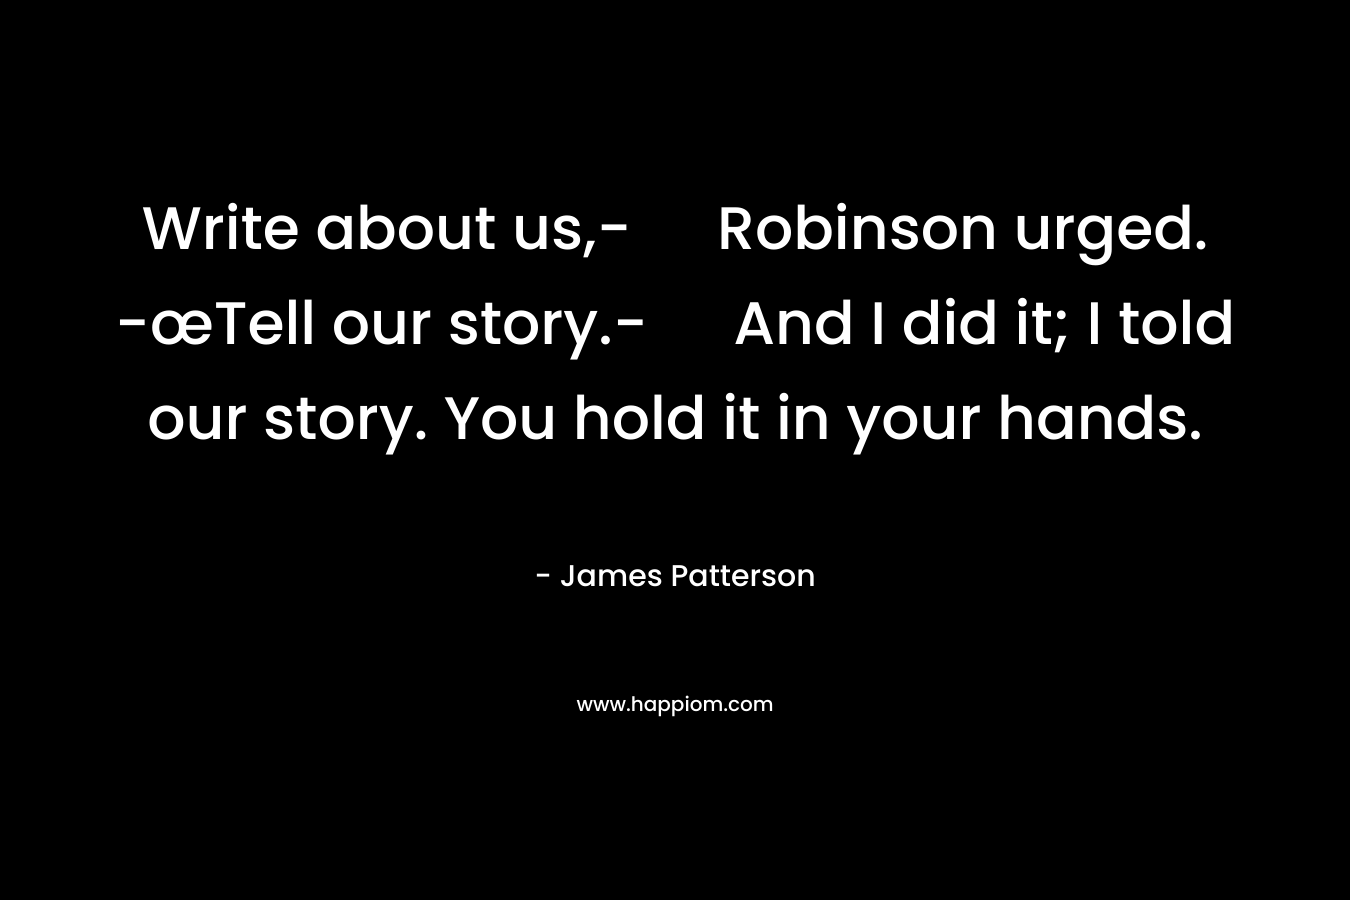 Write about us,- Robinson urged. -œTell our story.- And I did it; I told our story. You hold it in your hands.